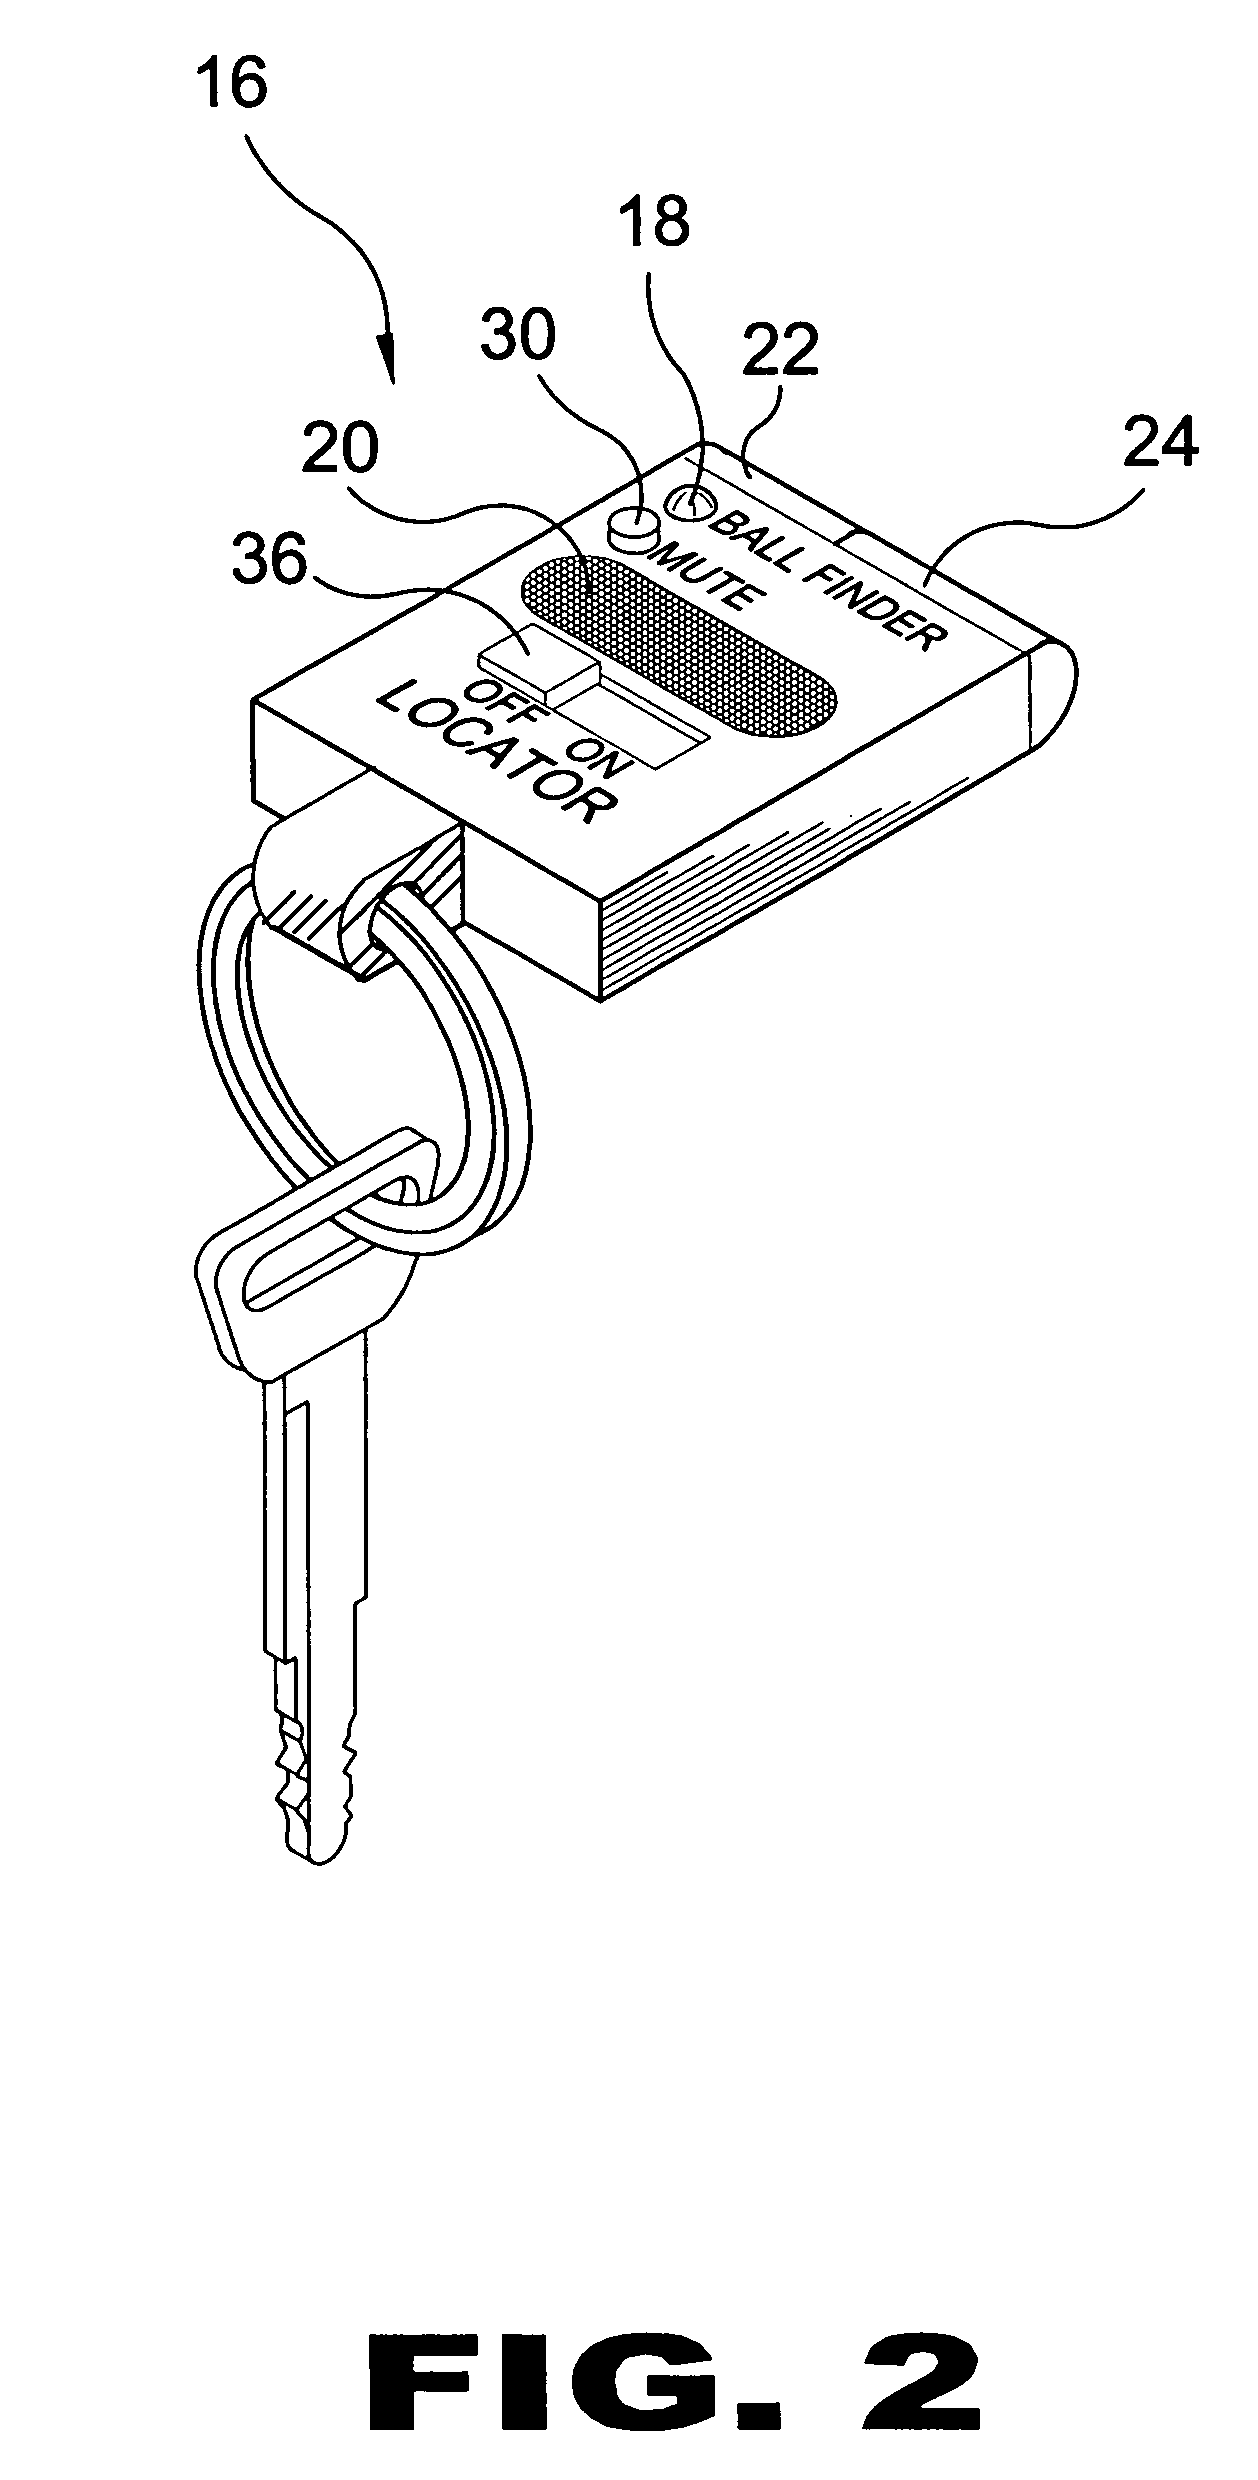 Method and apparatus for locating and recording the position of a golf ball during a golf game